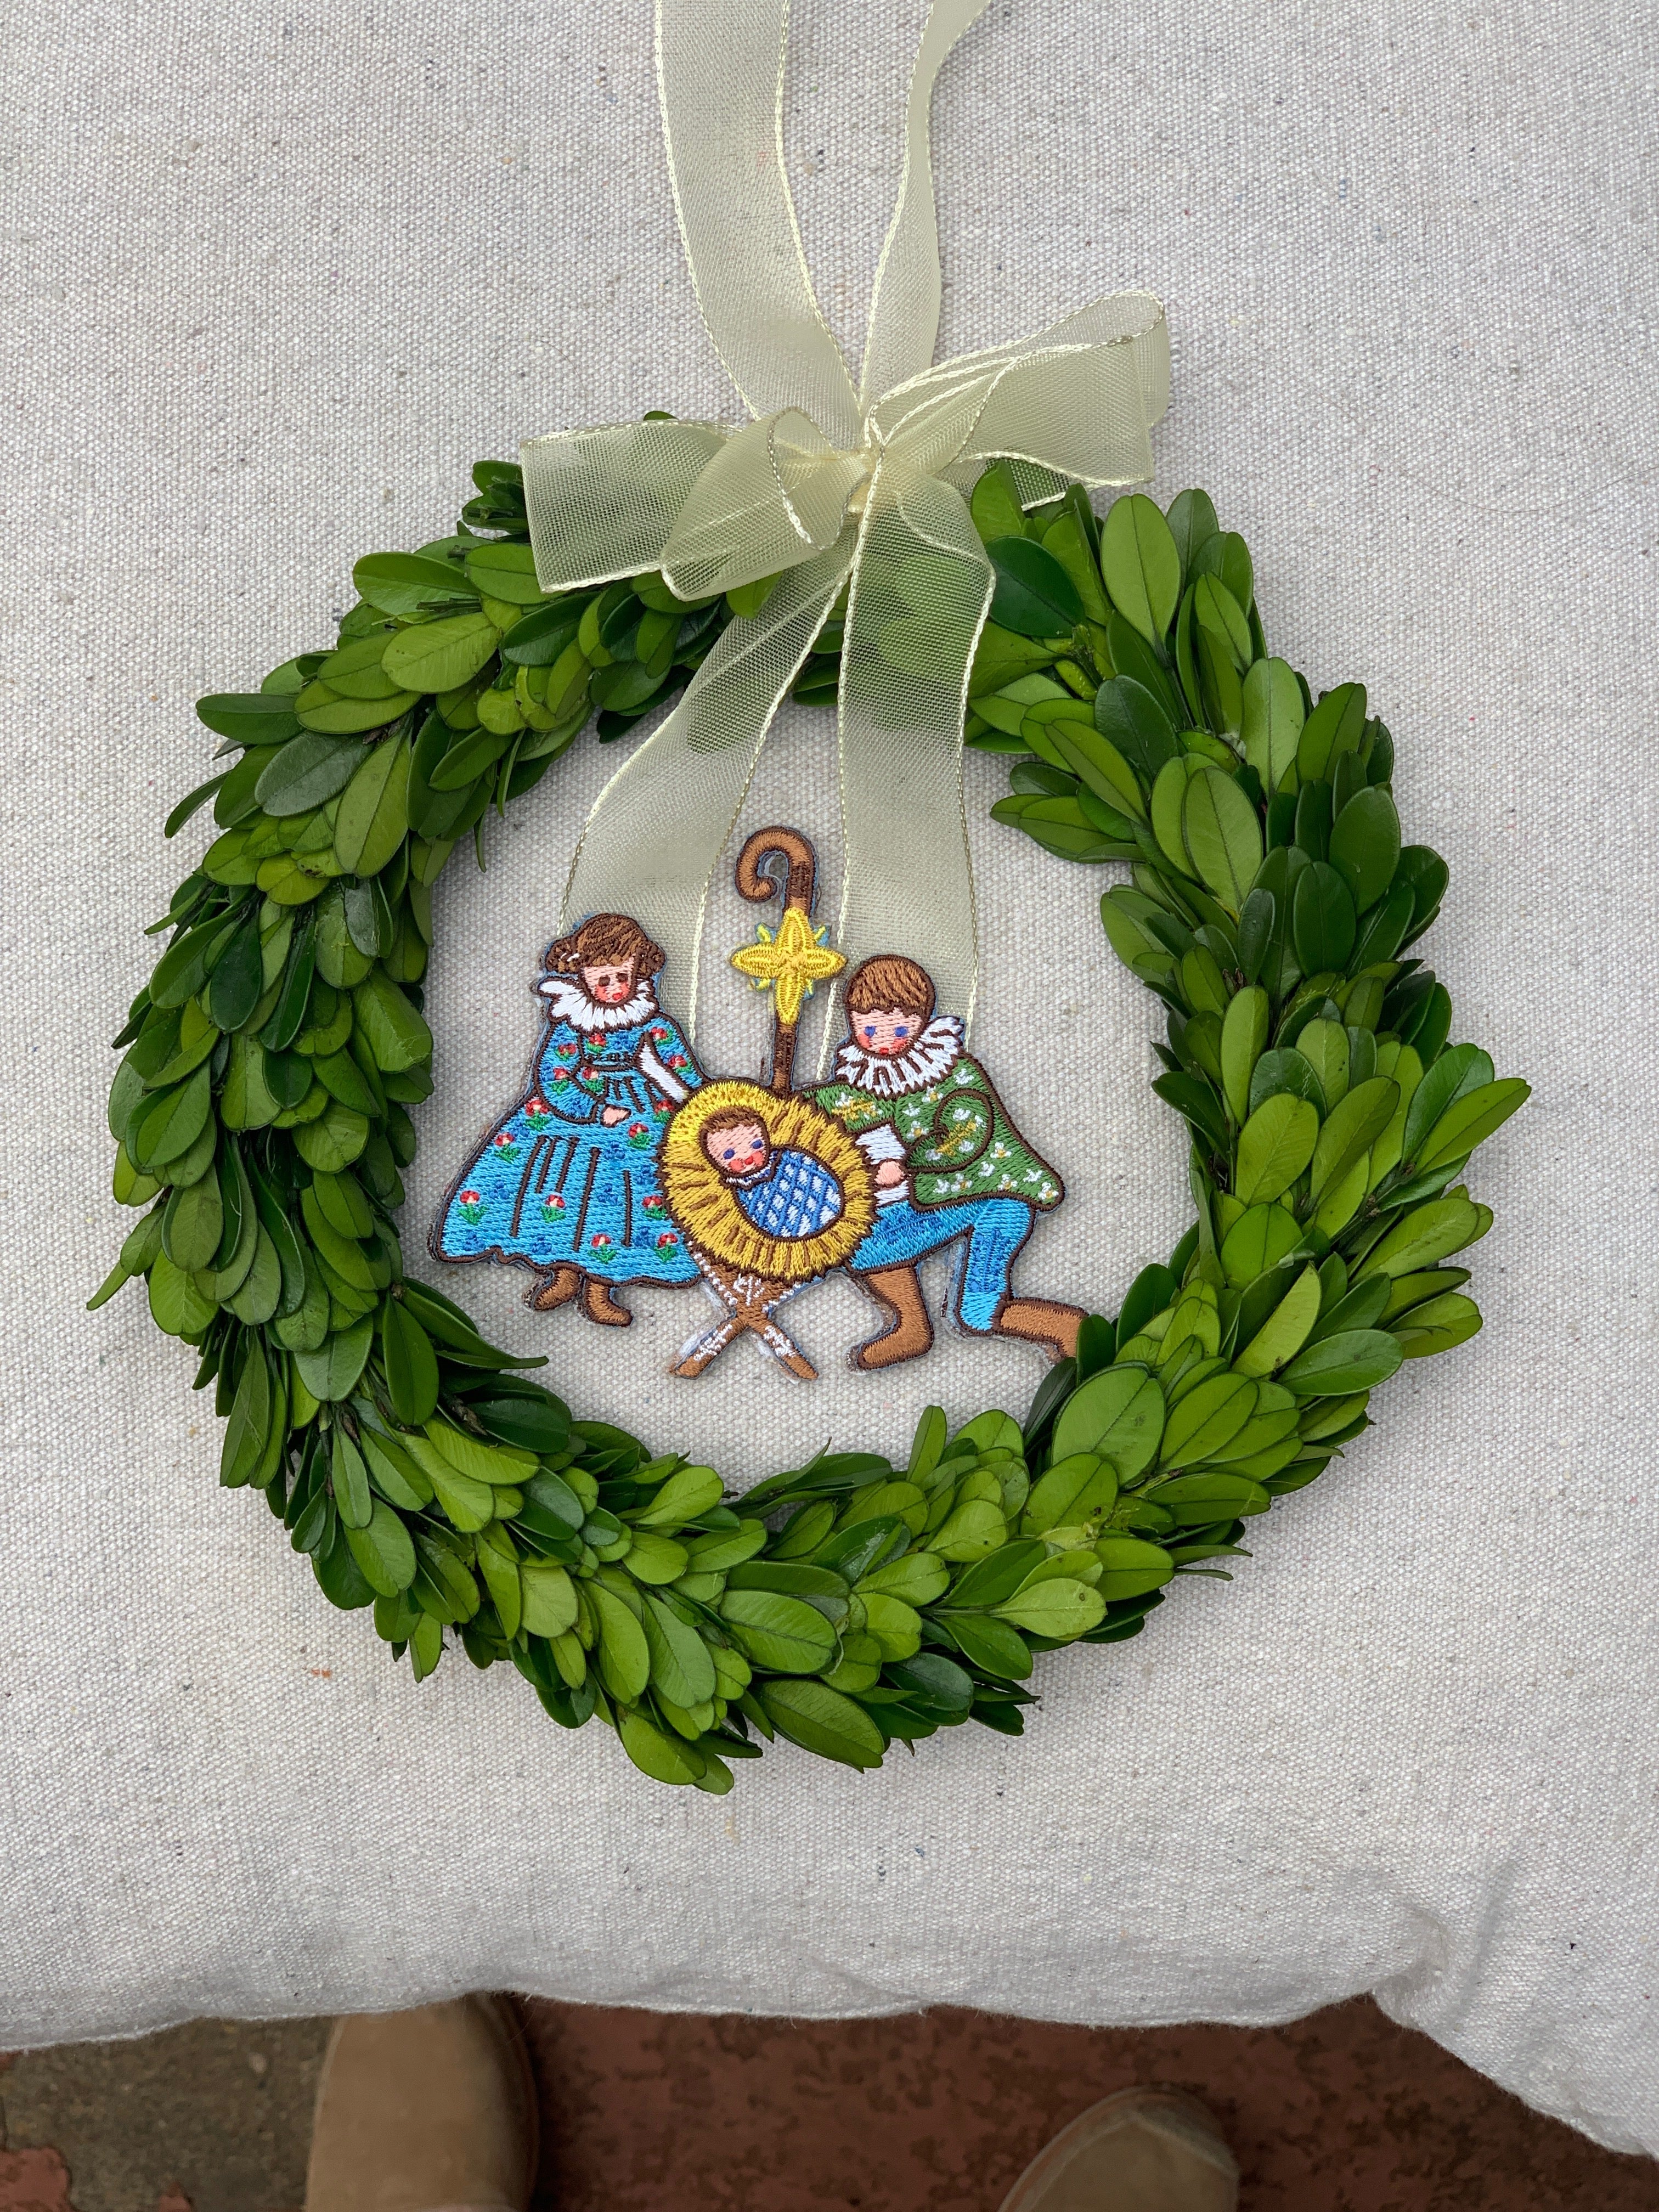 Embroidered Nativity Ornament in Preserved Laurel Wreath - Premium  from Tricia Lowenfield Design 